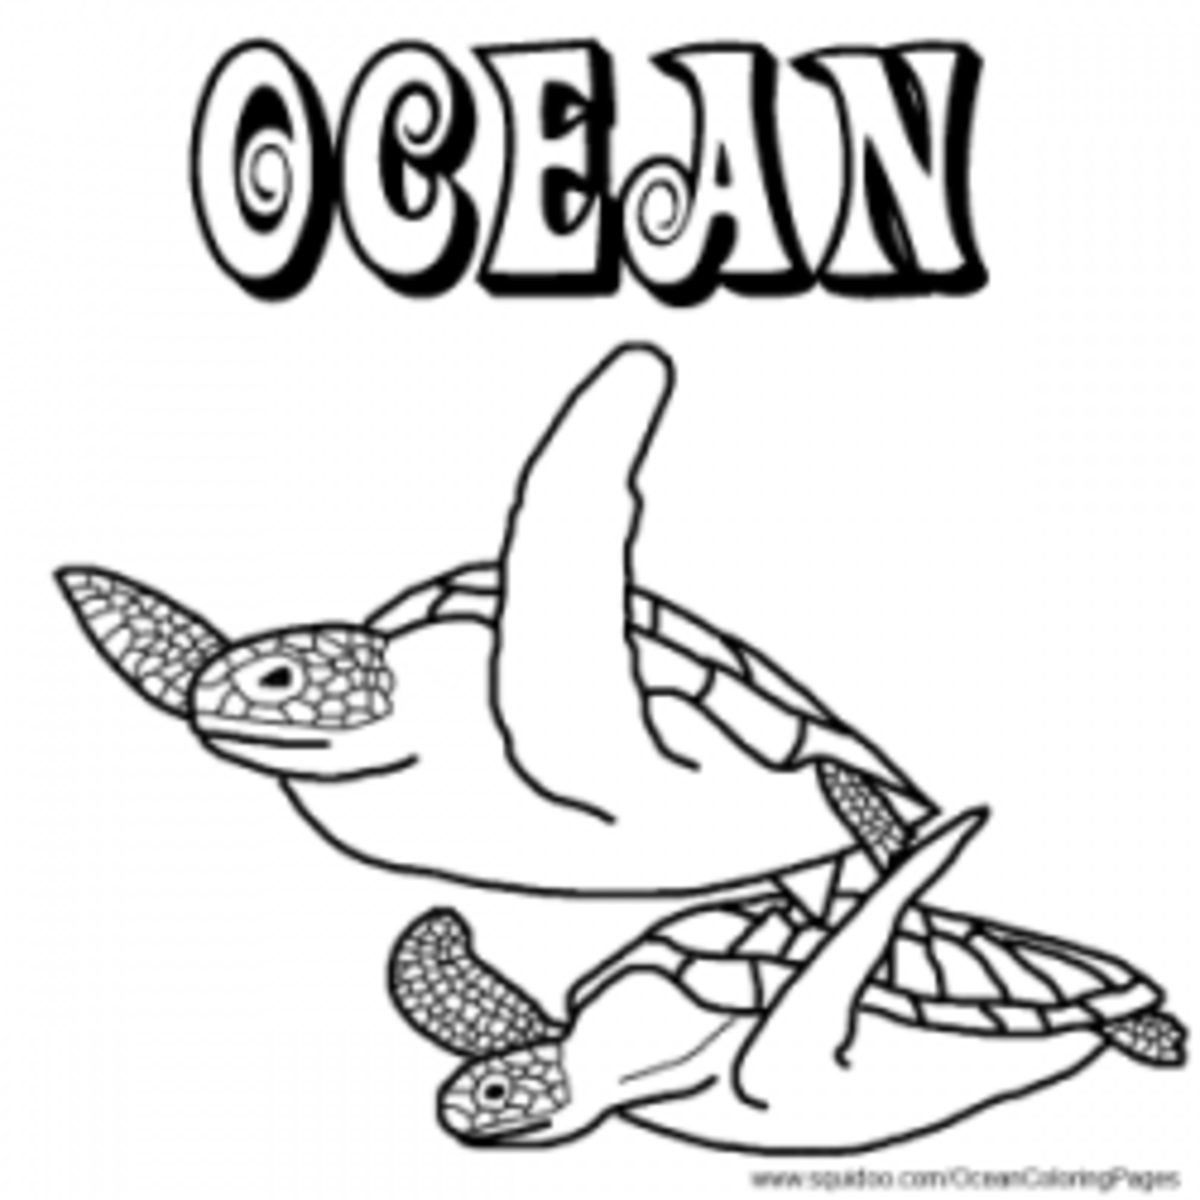 Ocean Animal Facts and Coloring Pages